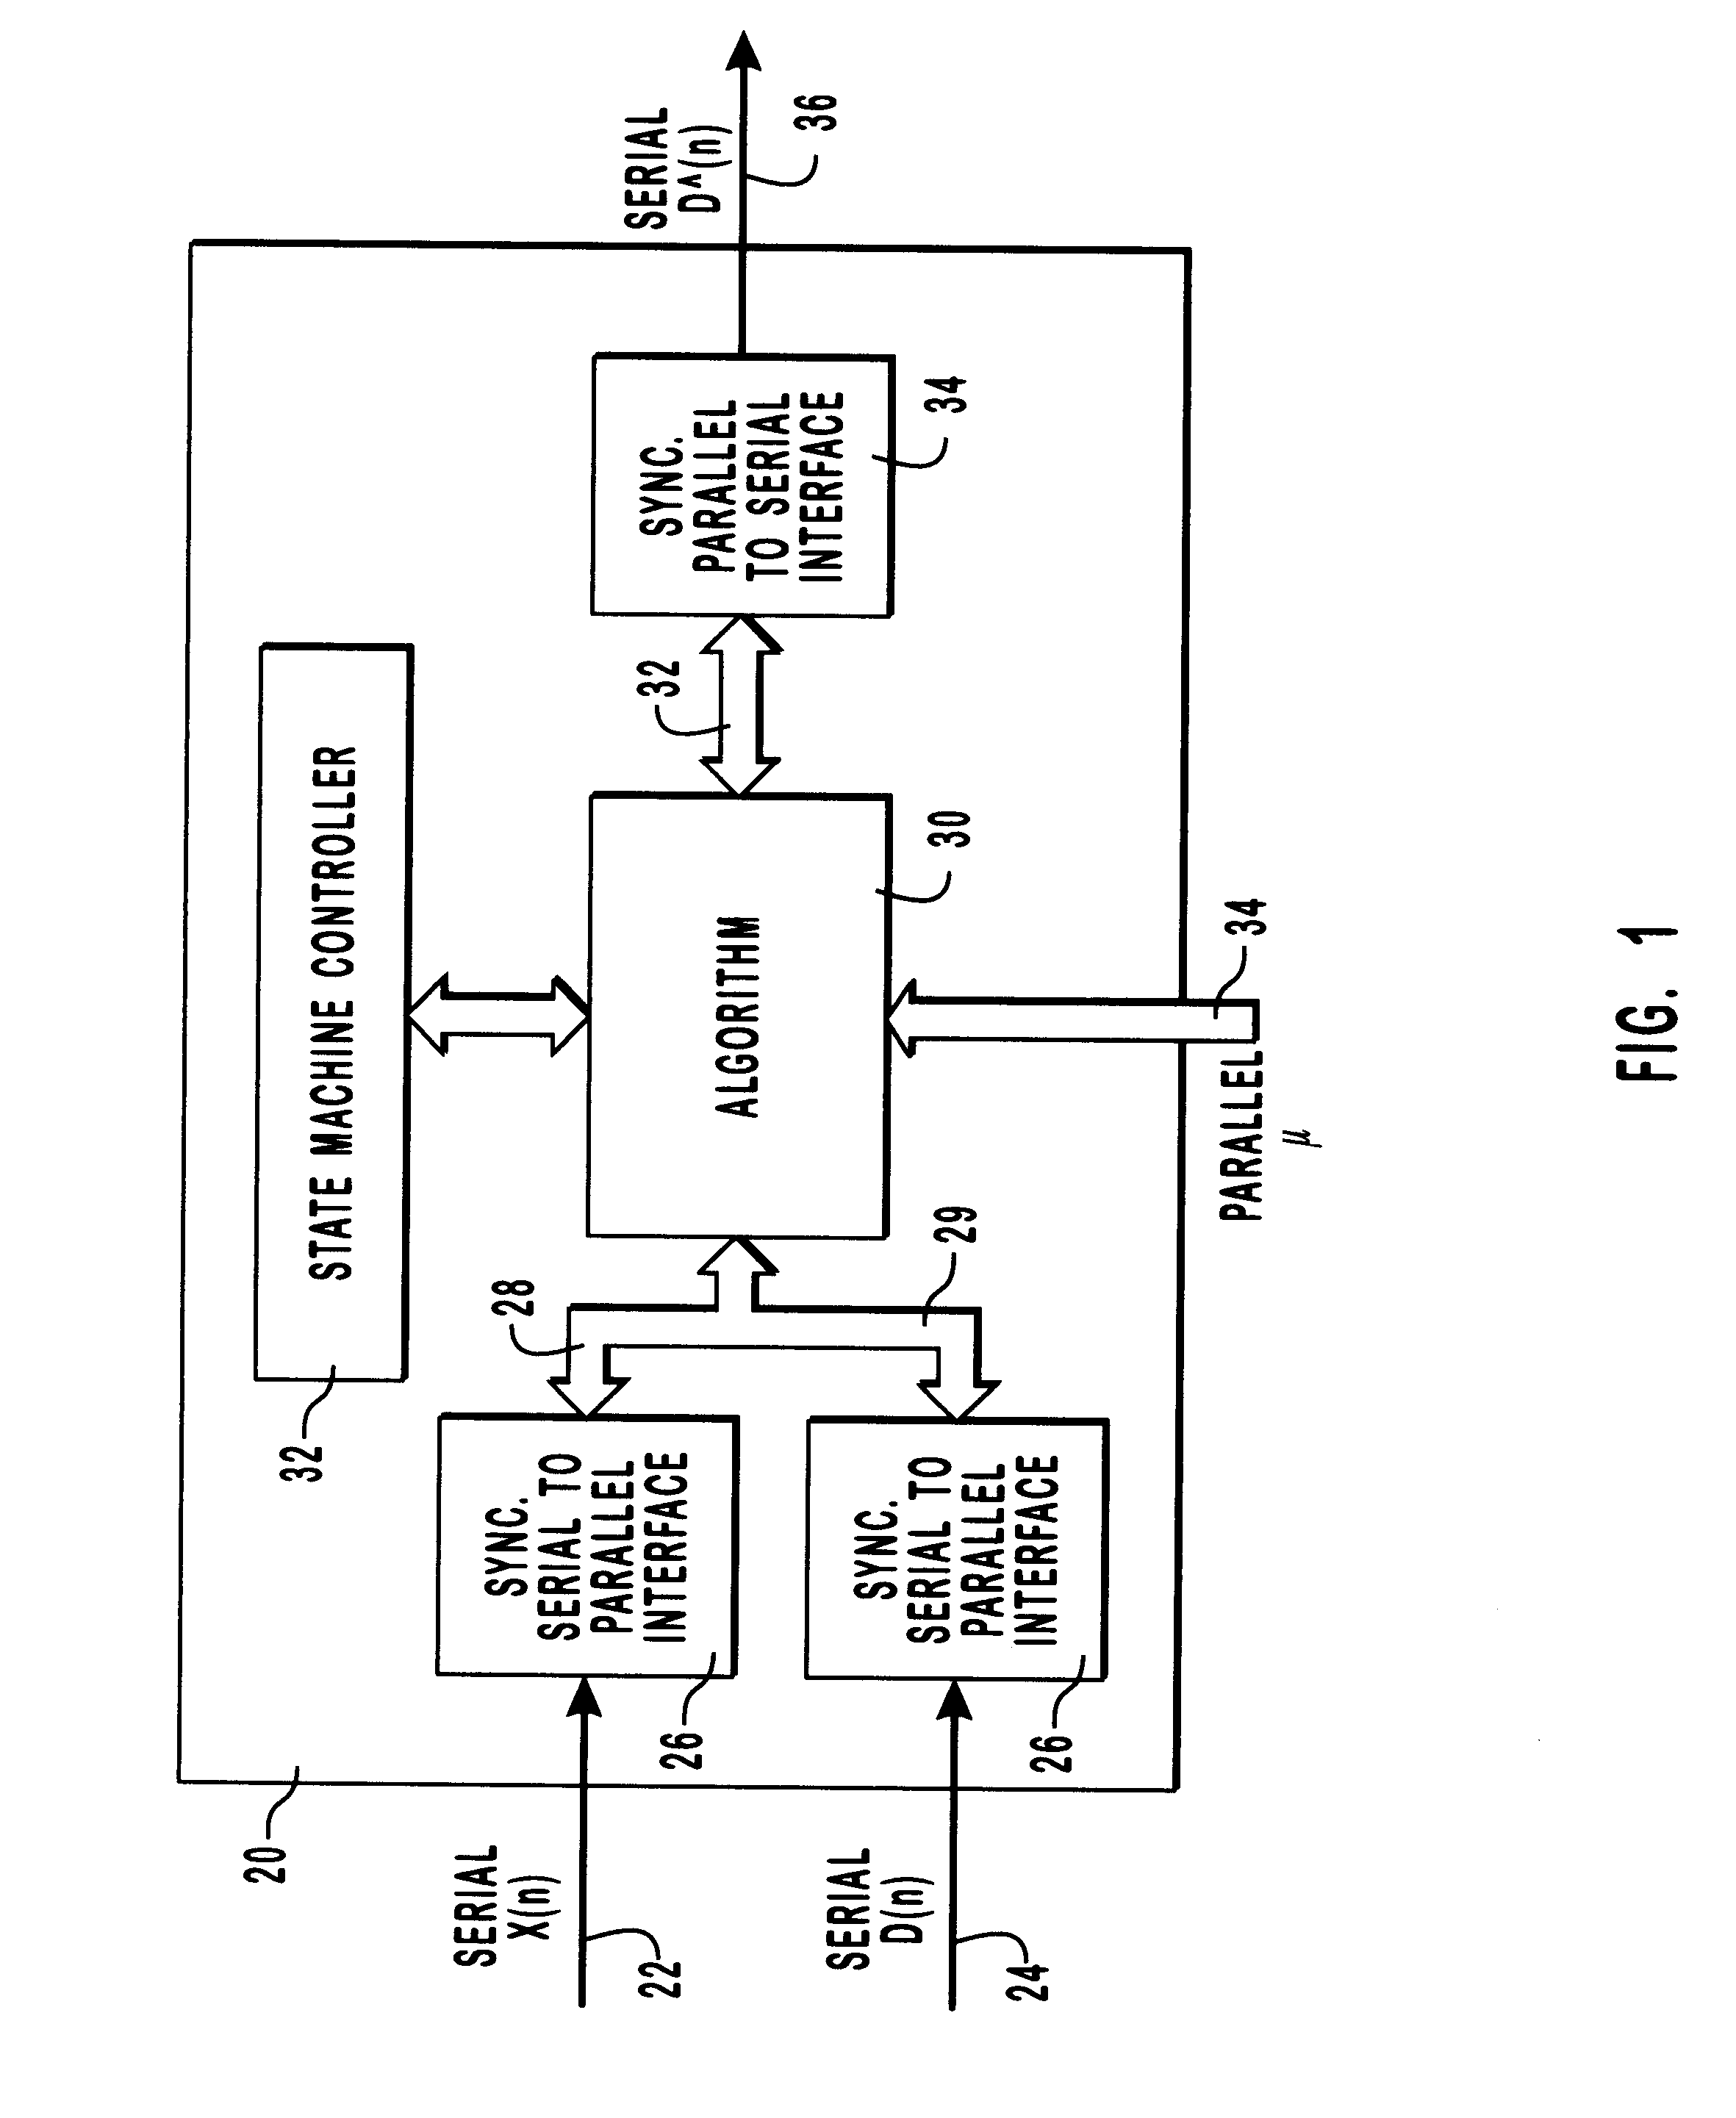 Methods and apparatus for adaptive filters